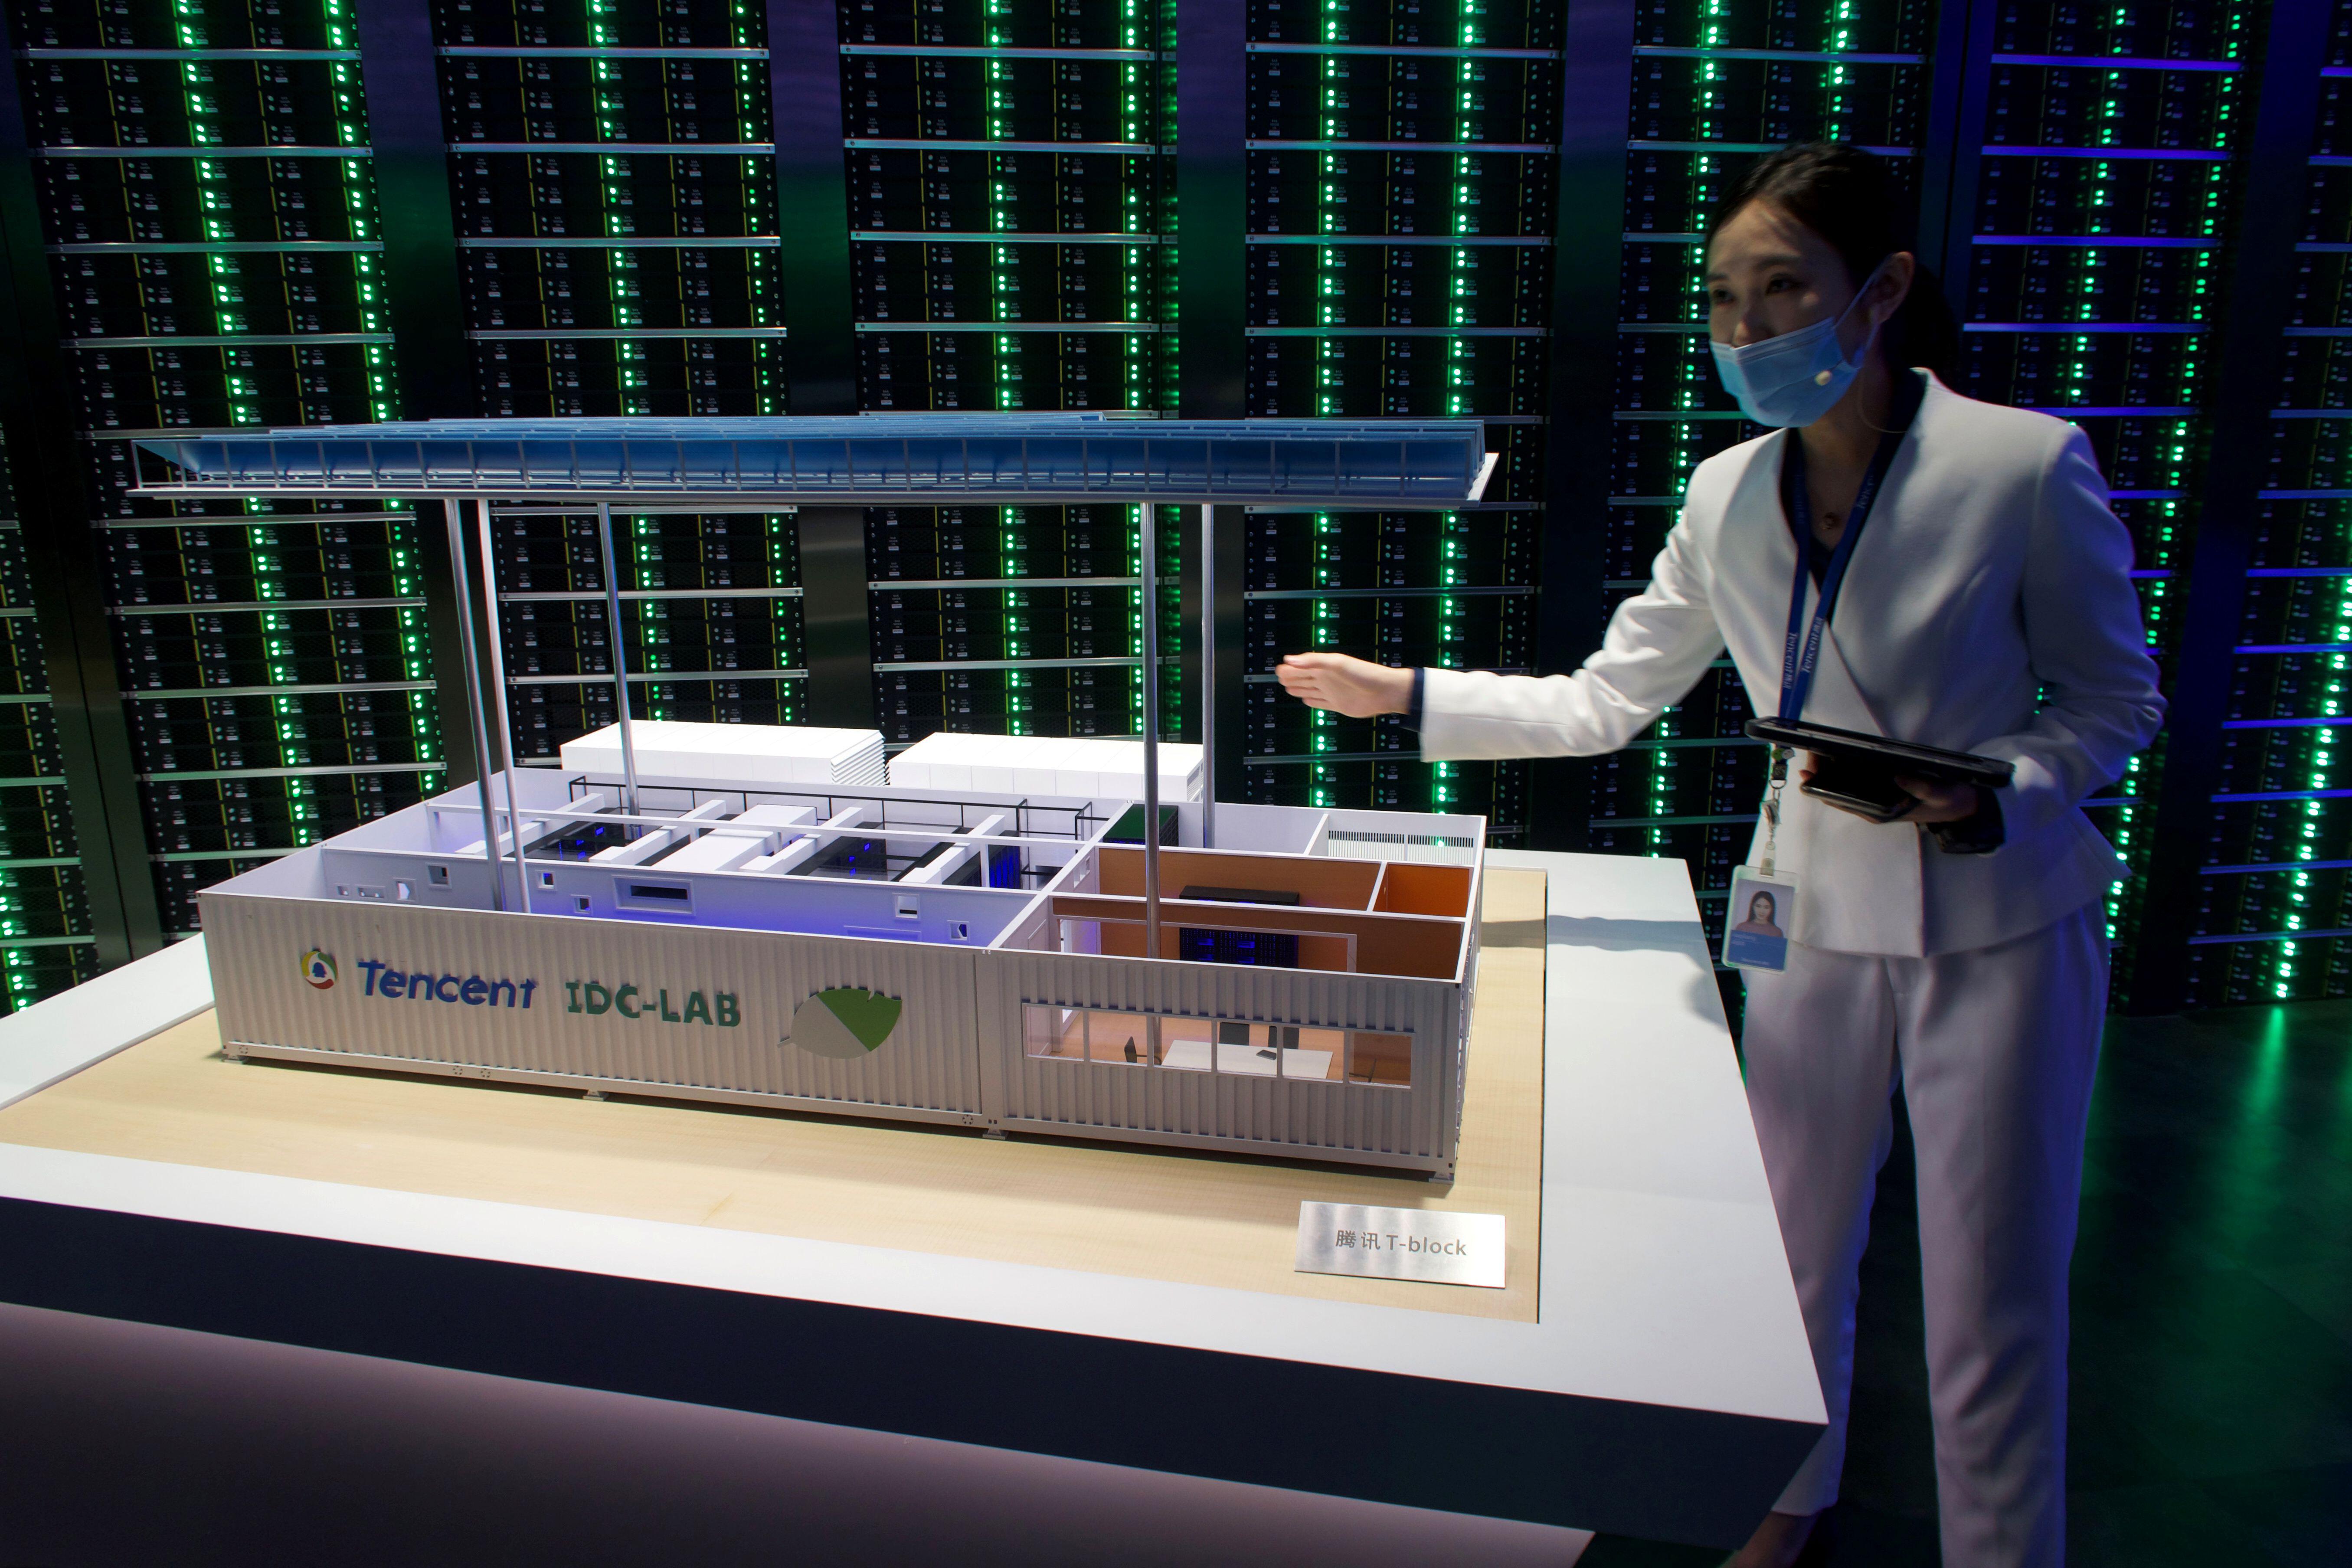 A staff member introduces Tencent's Internet Data Center (IDC) cloud computing service during a government-organized media tour to Tencent headquarters in Shenzhen, Guangdong province China September 27, 2020.